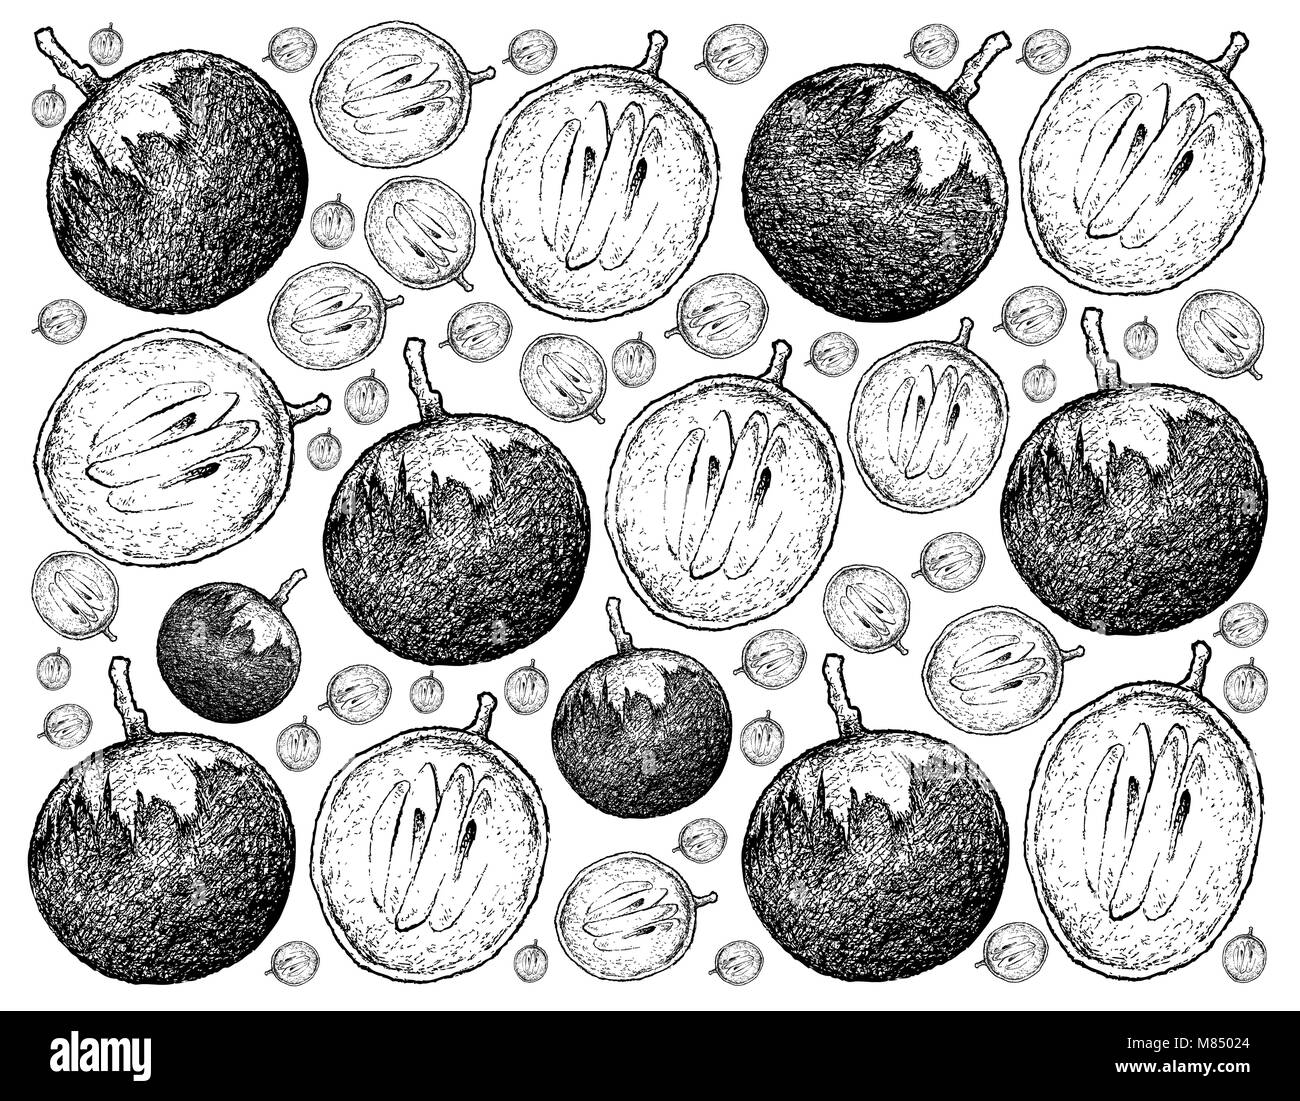 Tropical Fruit, Illustration Wallpaper Background of Hand Drawn Sketch of Star Apple or Chrysophyllum Cainito Fruits. Stock Photo